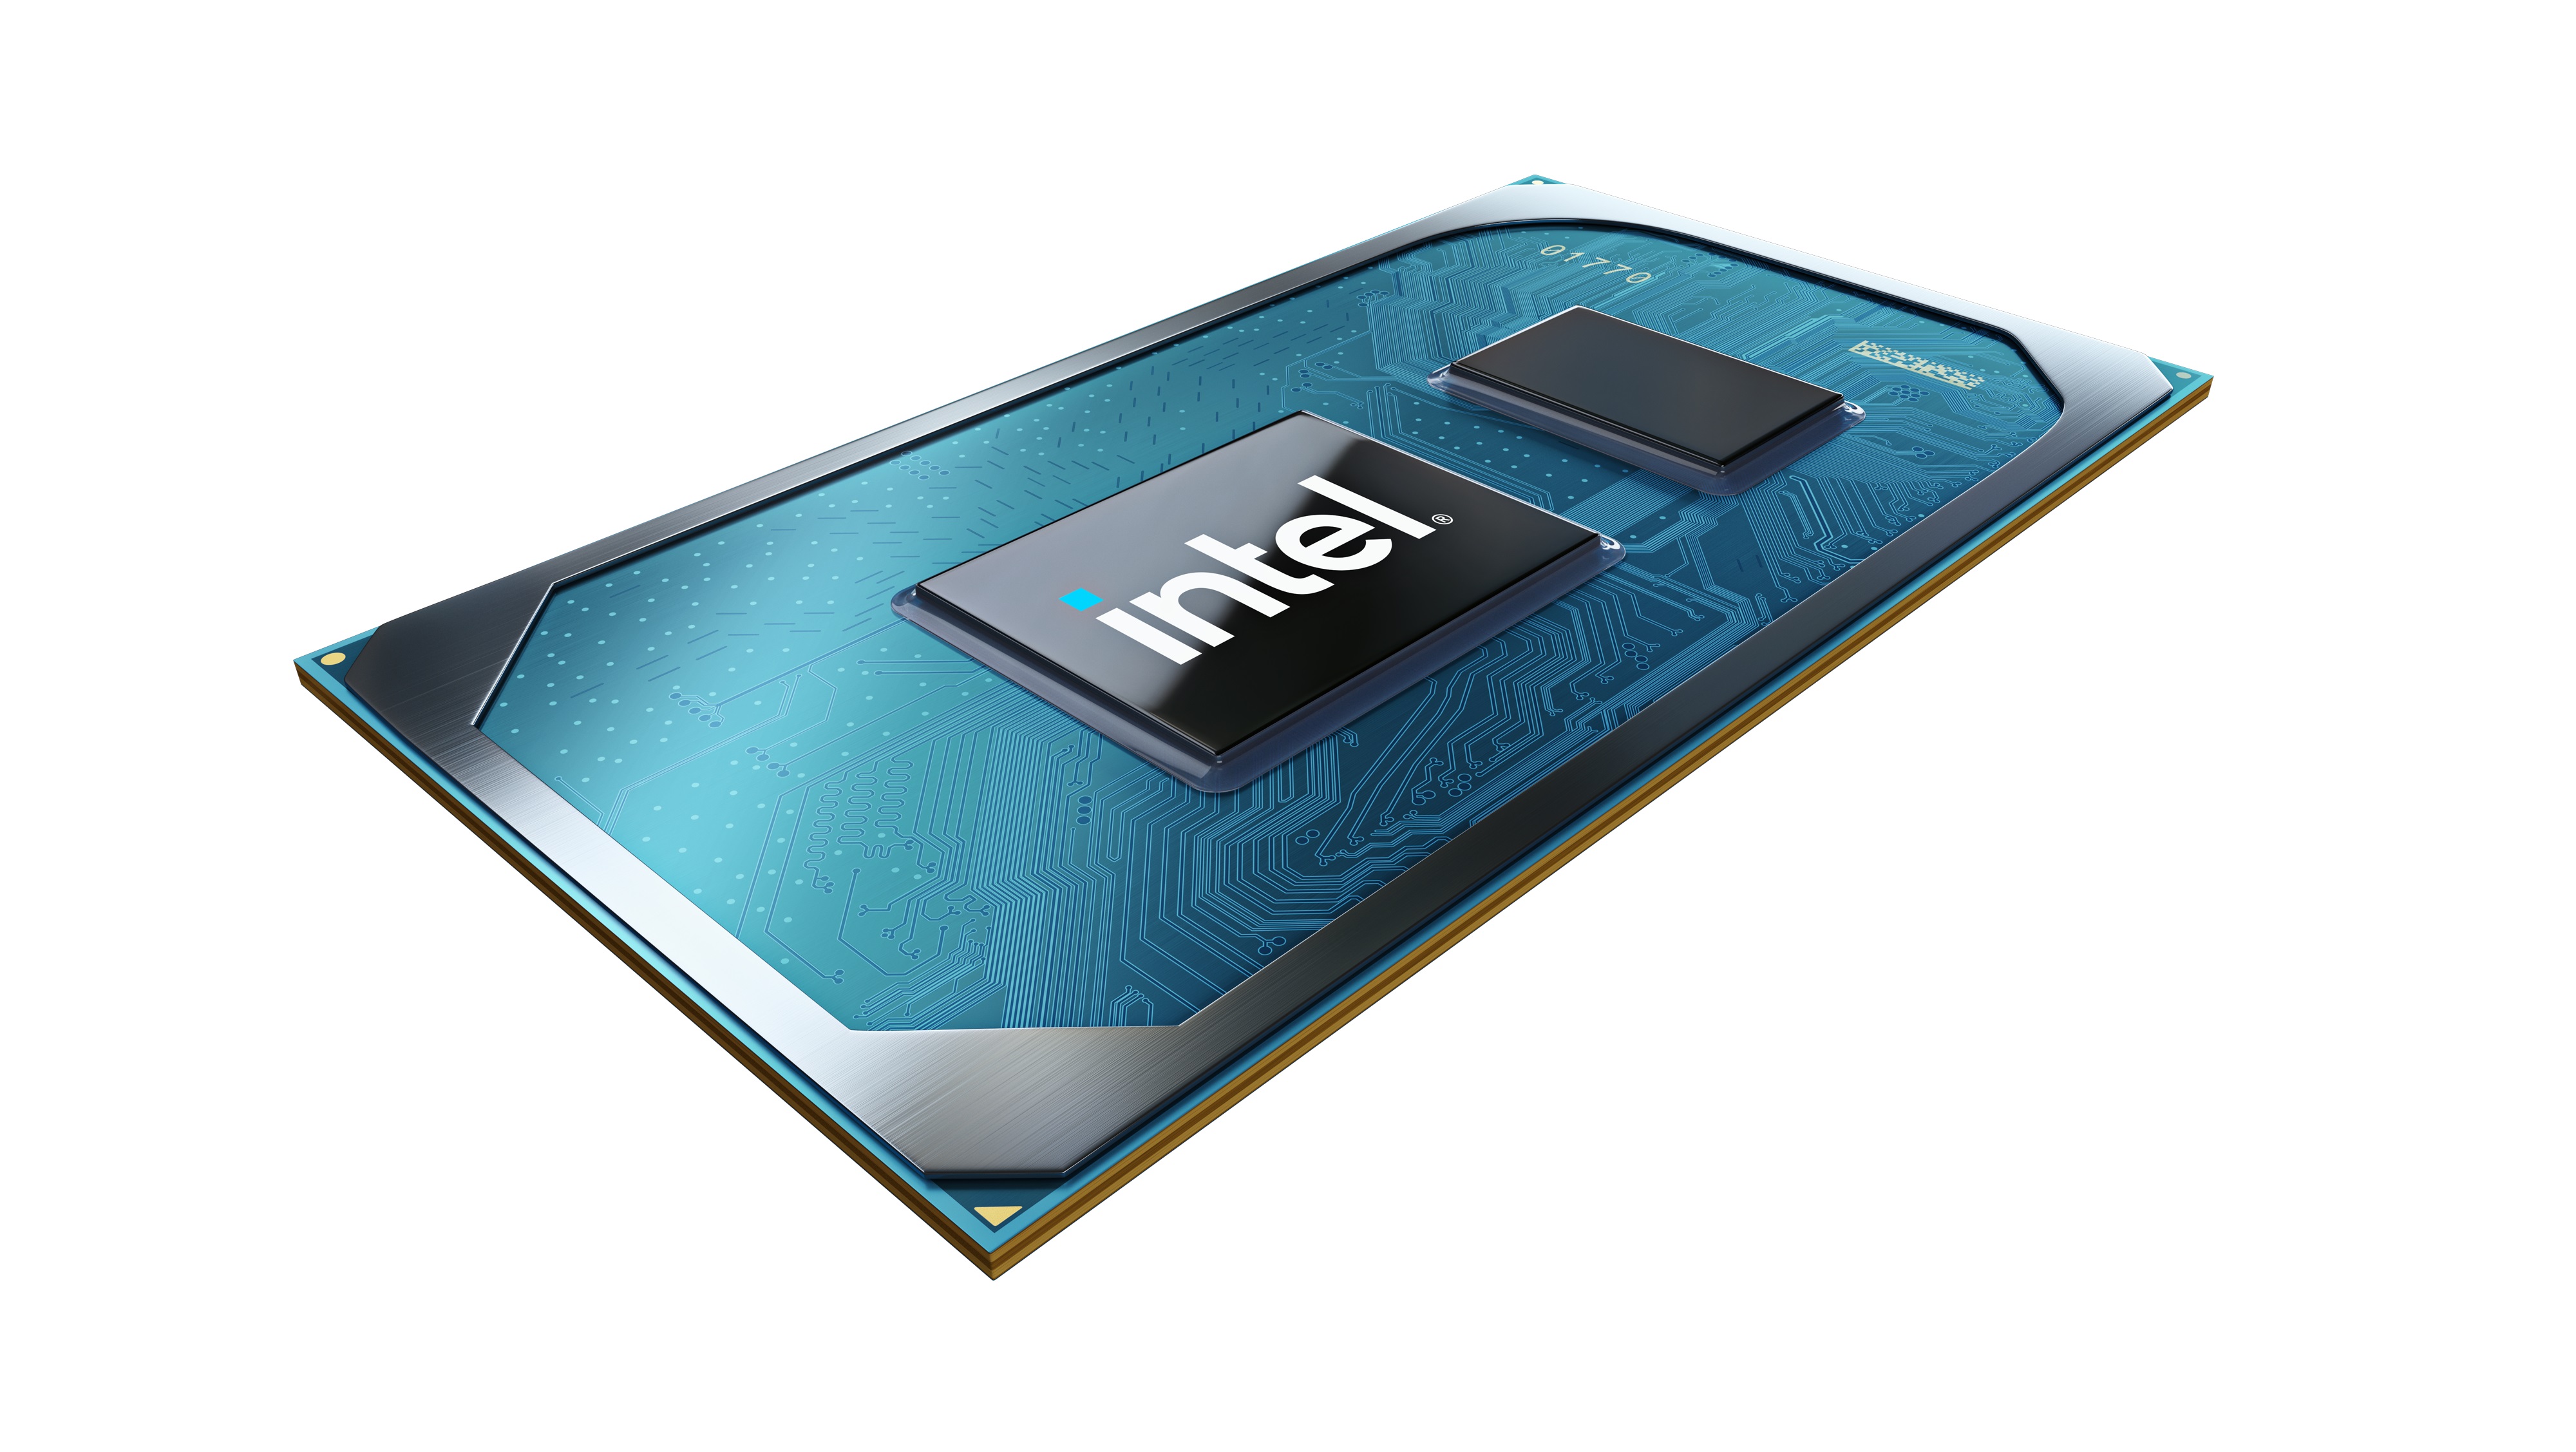 Intel Core i5-11300H Processor - Benchmarks and Specs 